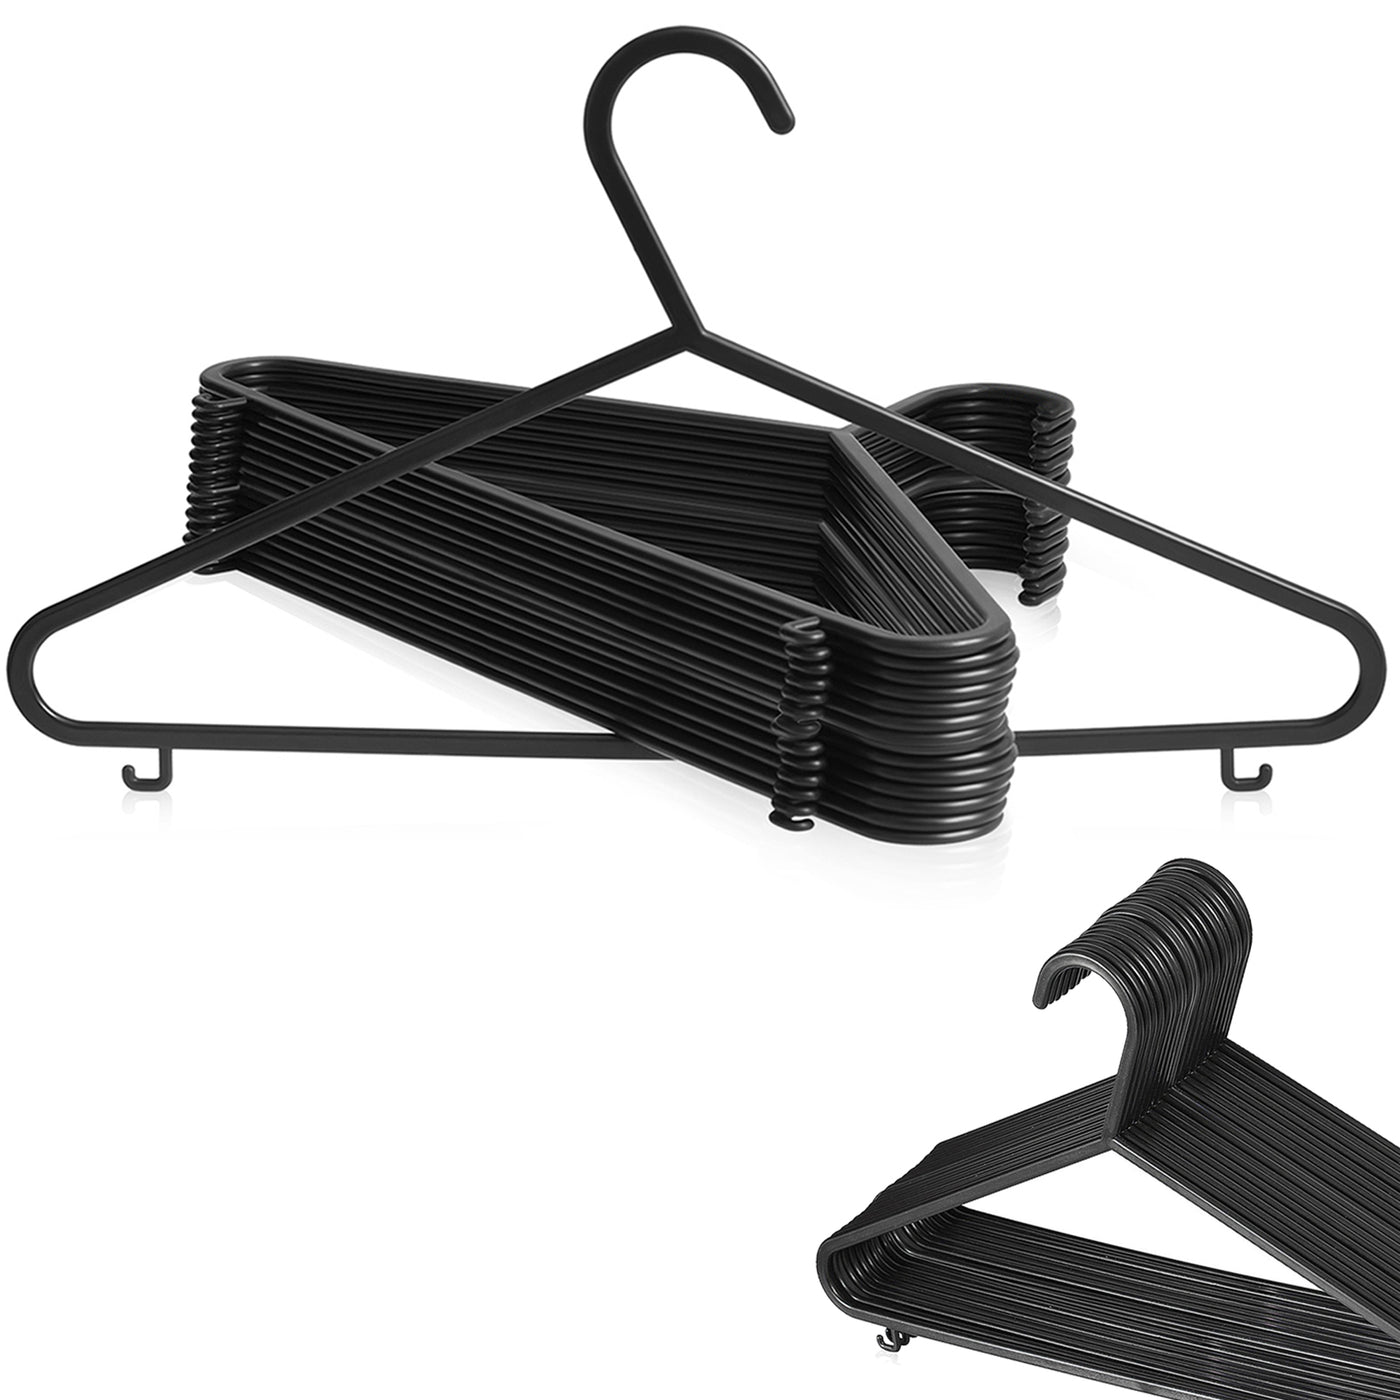 Pack of 100 Adult Plastic Clothes Hangers – Nyxi